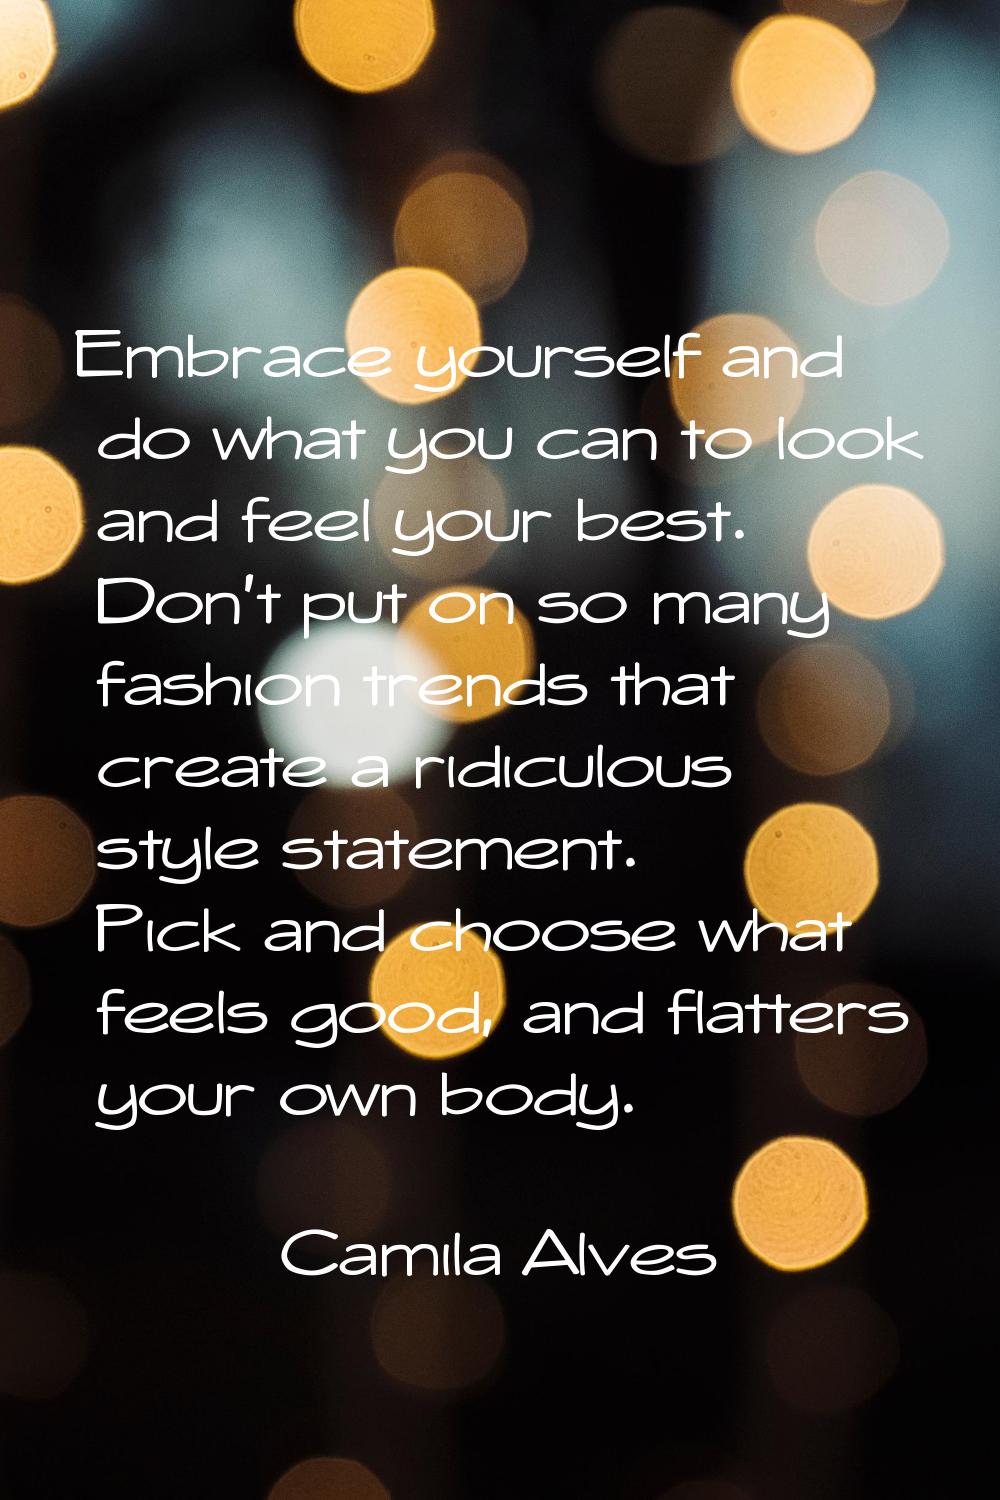 Embrace yourself and do what you can to look and feel your best. Don't put on so many fashion trend